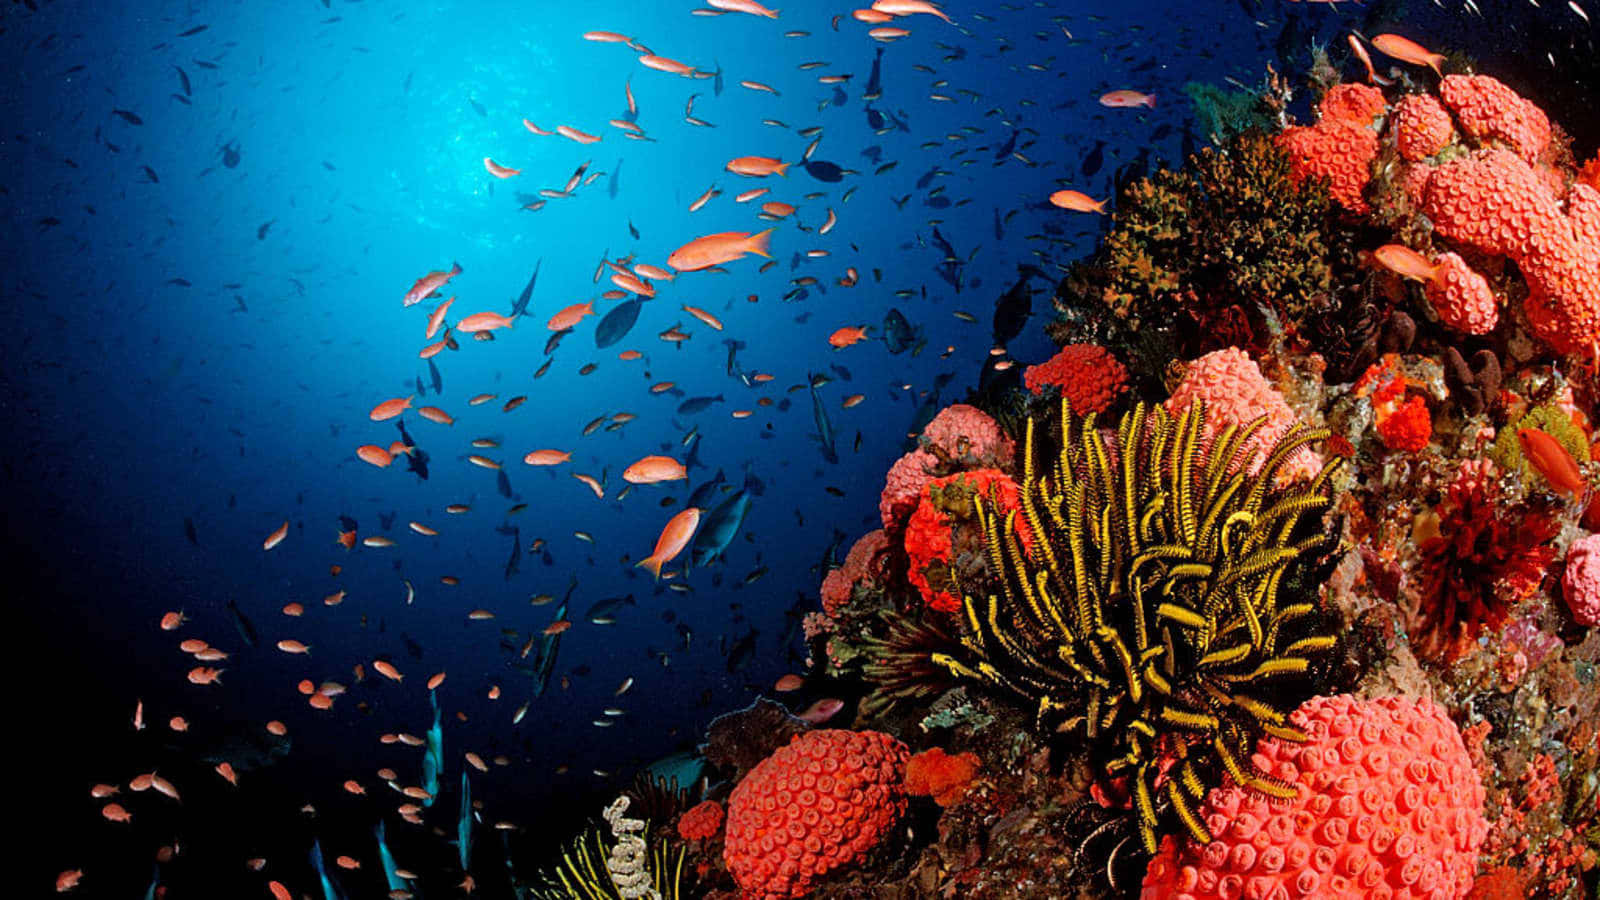 A tropical coral reef, teeming with life.